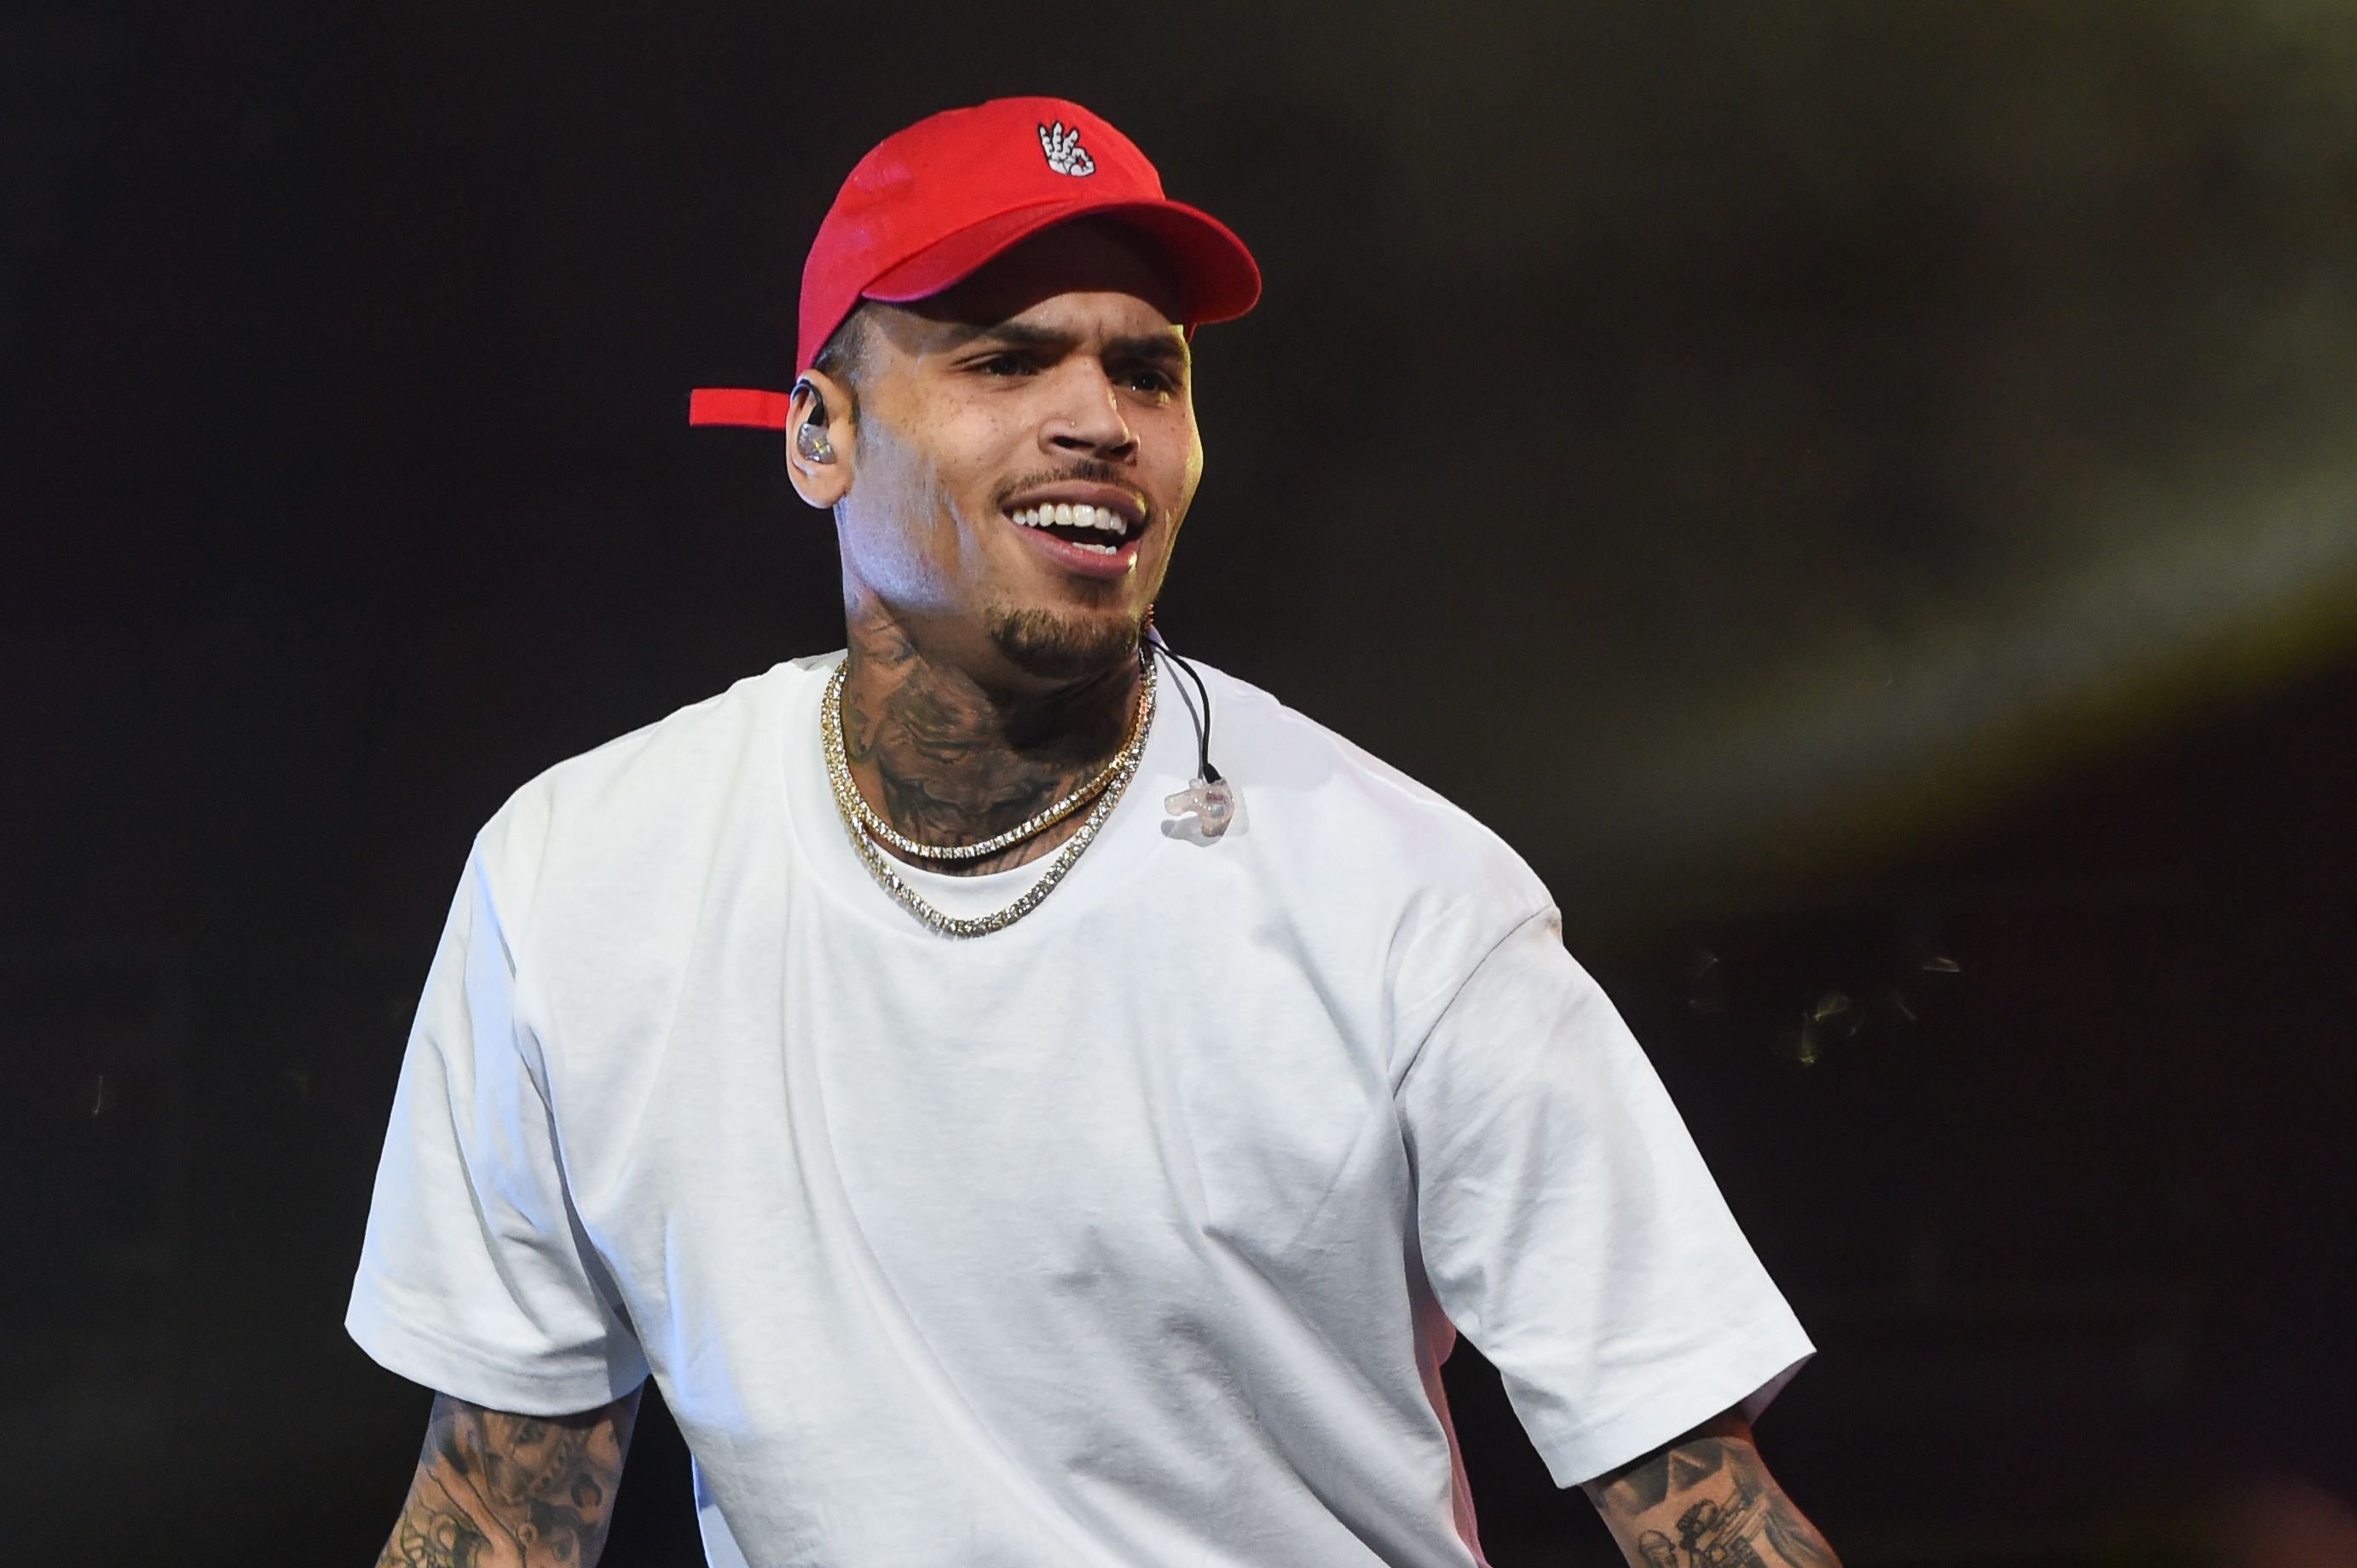 Chris Brown performing at The Big Show at Little Caesars Arena in Detroit on December 28, 2017 │Photo: Getty Images